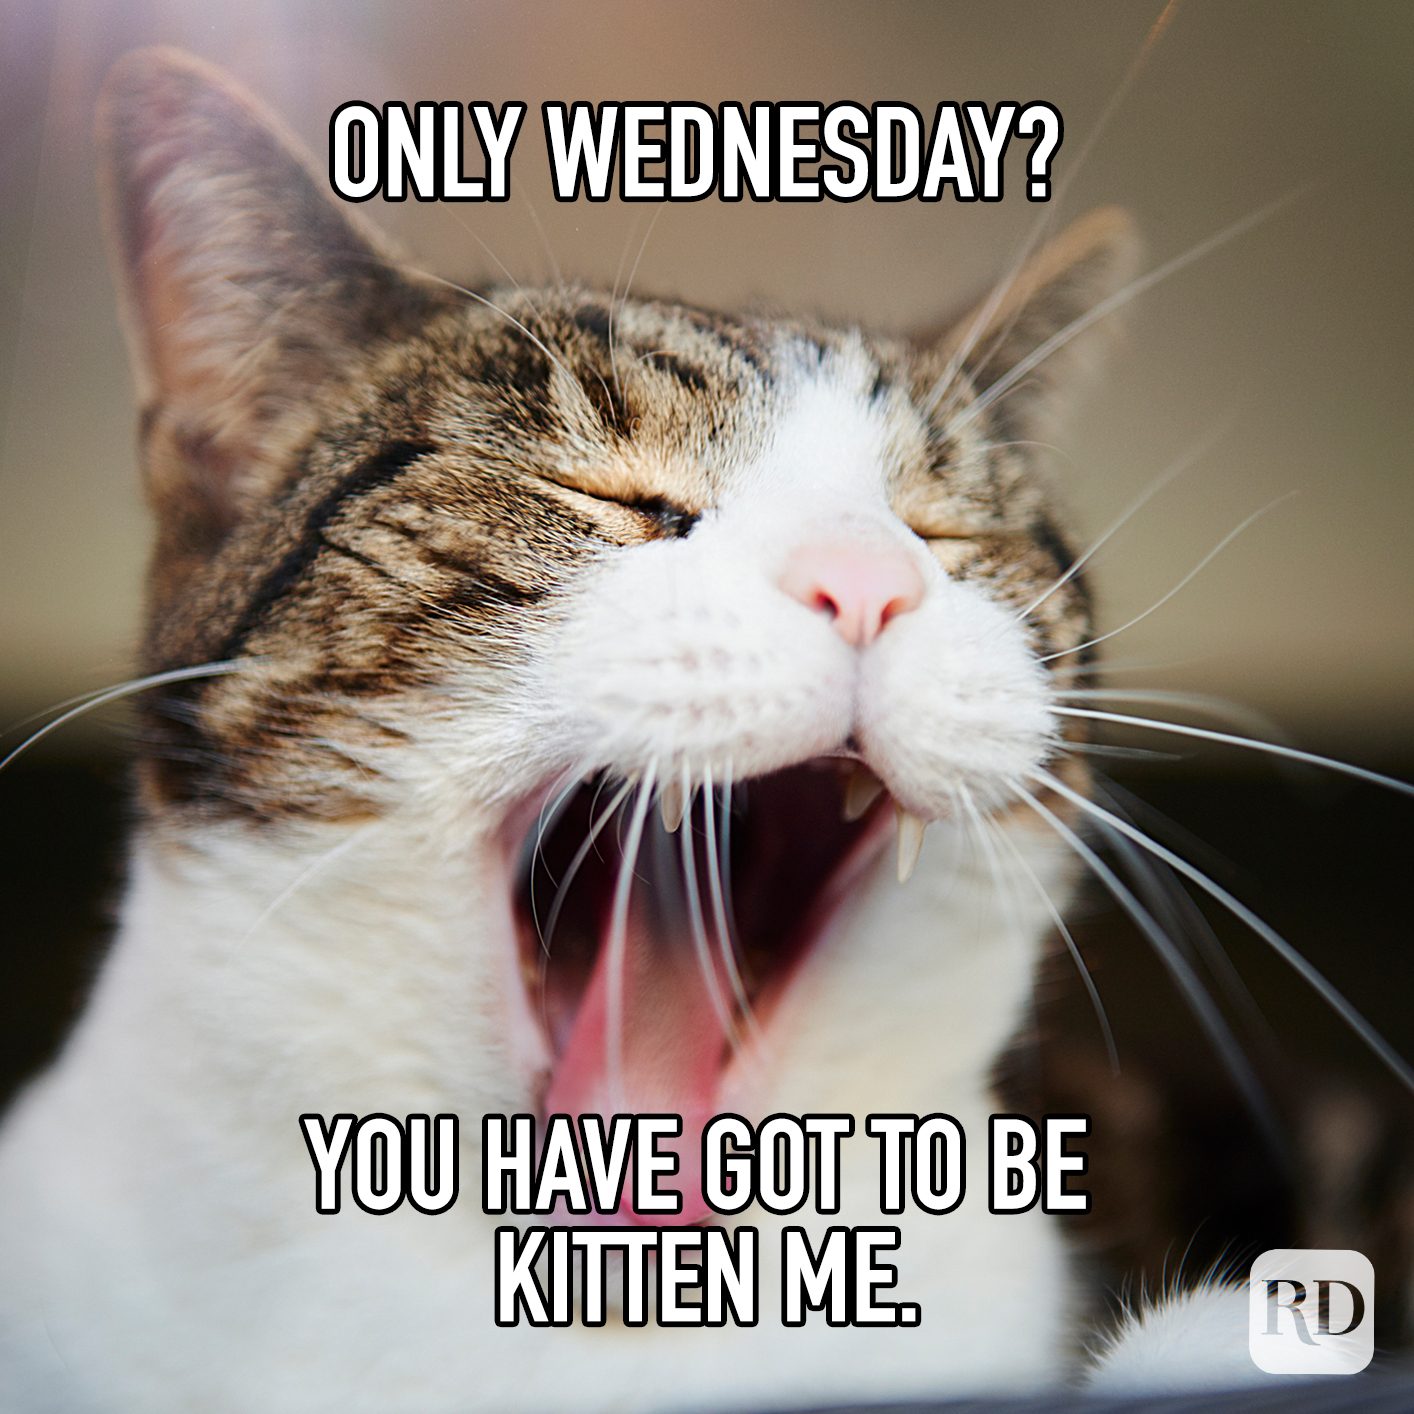 Only Wednesday You Have Got To Be Kitten Me meme text over image of kitten yawning